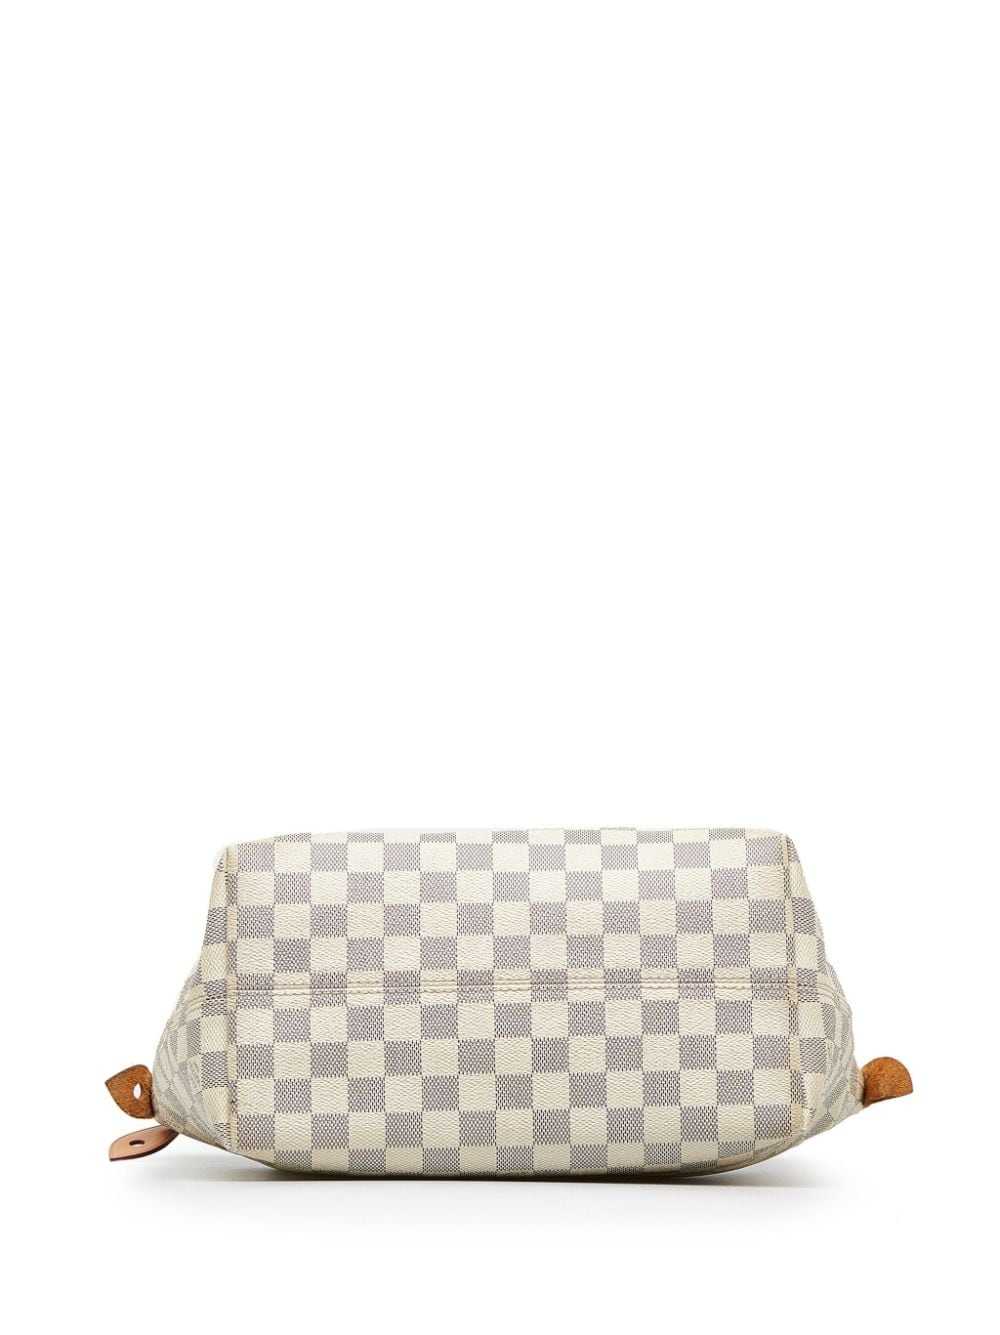 Louis Vuitton Pre-Owned 2019 pre-owned Damier Azu… - image 4